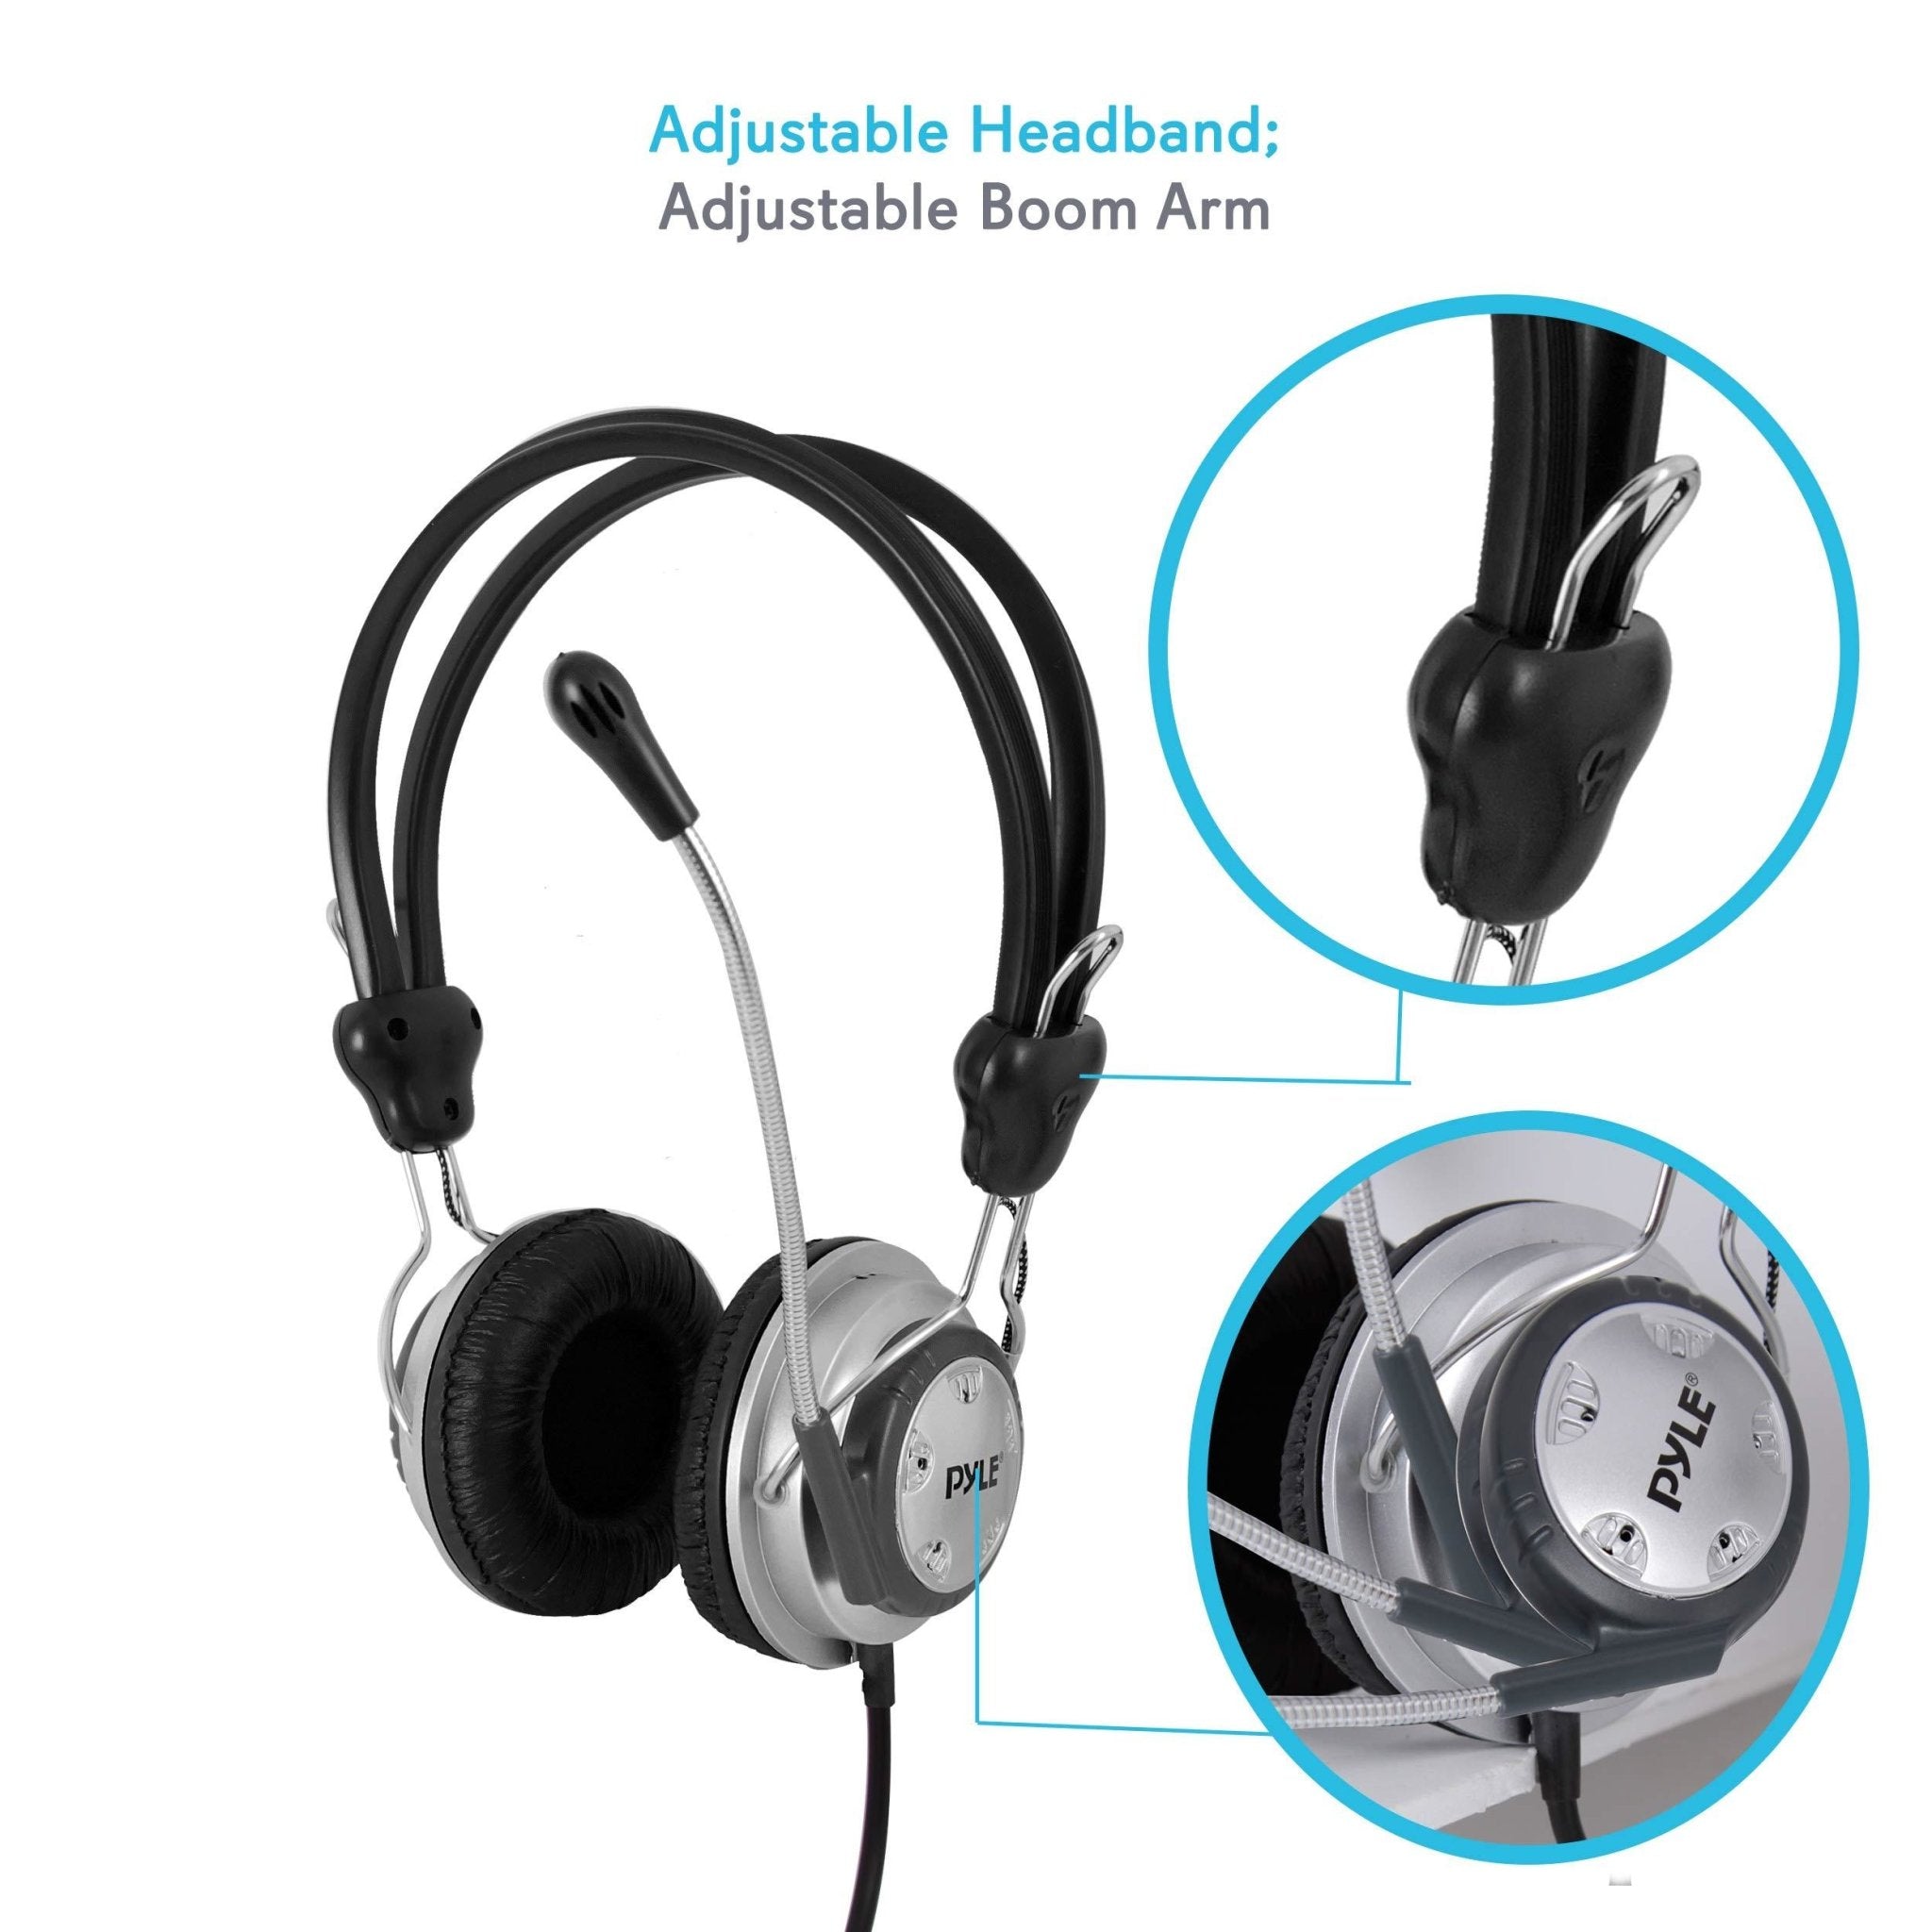 Pyle ™ Headphones Stereo Computer Audio Headset / Microphone Multimedia for Video Chat and Gaming with Noise Canceling - Bootiq